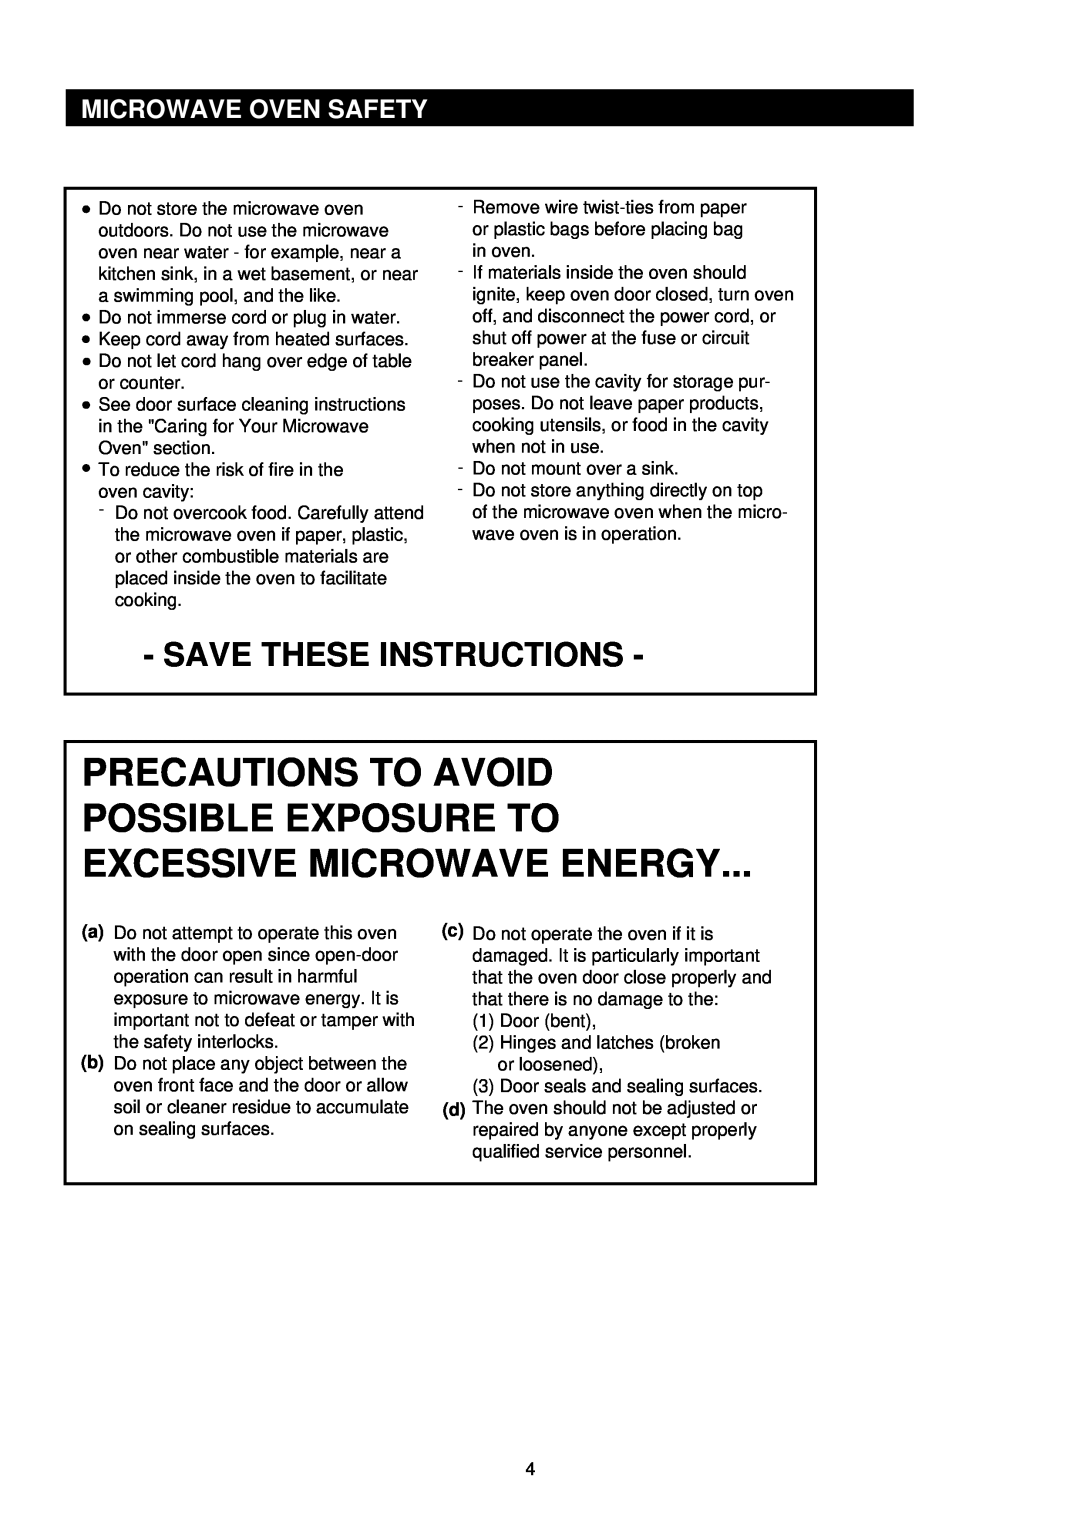 Palsonic PMO-850, PMO-888 Precautions To Avoid Possible Exposure To Excessive Microwave Energy, Save These Instructions 